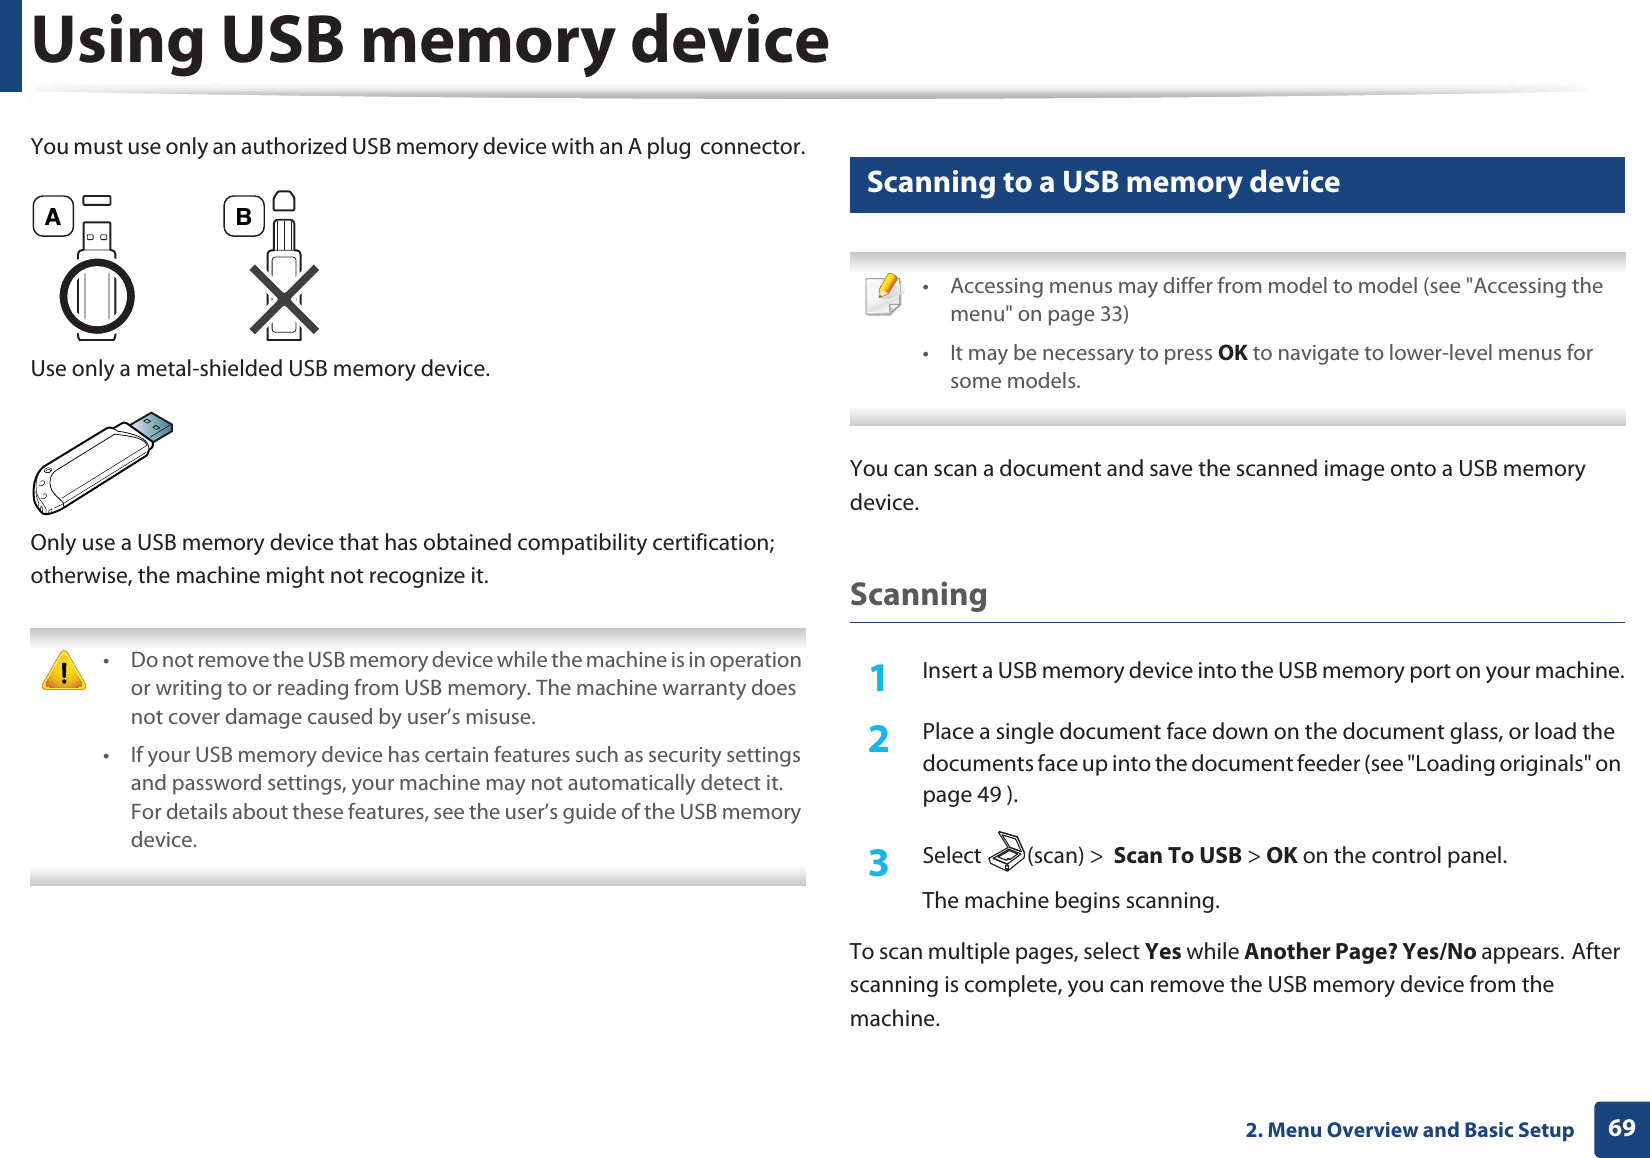 Using USB memory device692. Menu Overview and Basic SetupYou must use only an authorized USB memory device with an A plug  connector.Use only a metal-shielded USB memory device.Only use a USB memory device that has obtained compatibility certification; otherwise, the machine might not recognize it. • Do not remove the USB memory device while the machine is in operation or writing to or reading from USB memory. The machine warranty does not cover damage caused by user’s misuse. • If your USB memory device has certain features such as security settings and password settings, your machine may not automatically detect it. For details about these features, see the user’s guide of the USB memory device. 24 Scanning to a USB memory device • Accessing menus may differ from model to model (see &quot;Accessing the menu&quot; on page 33)• It may be necessary to press OK to navigate to lower-level menus for some models. You can scan a document and save the scanned image onto a USB memory device.Scanning1Insert a USB memory device into the USB memory port on your machine.2  Place a single document face down on the document glass, or load the documents face up into the document feeder (see &quot;Loading originals&quot; on page 49 ).3  Select (scan) &gt;  Scan To USB &gt; OK on the control panel.The machine begins scanning.To scan multiple pages, select Yes while Another Page? Yes/No appears.GAfter scanning is complete, you can remove the USB memory device from the machine.A B